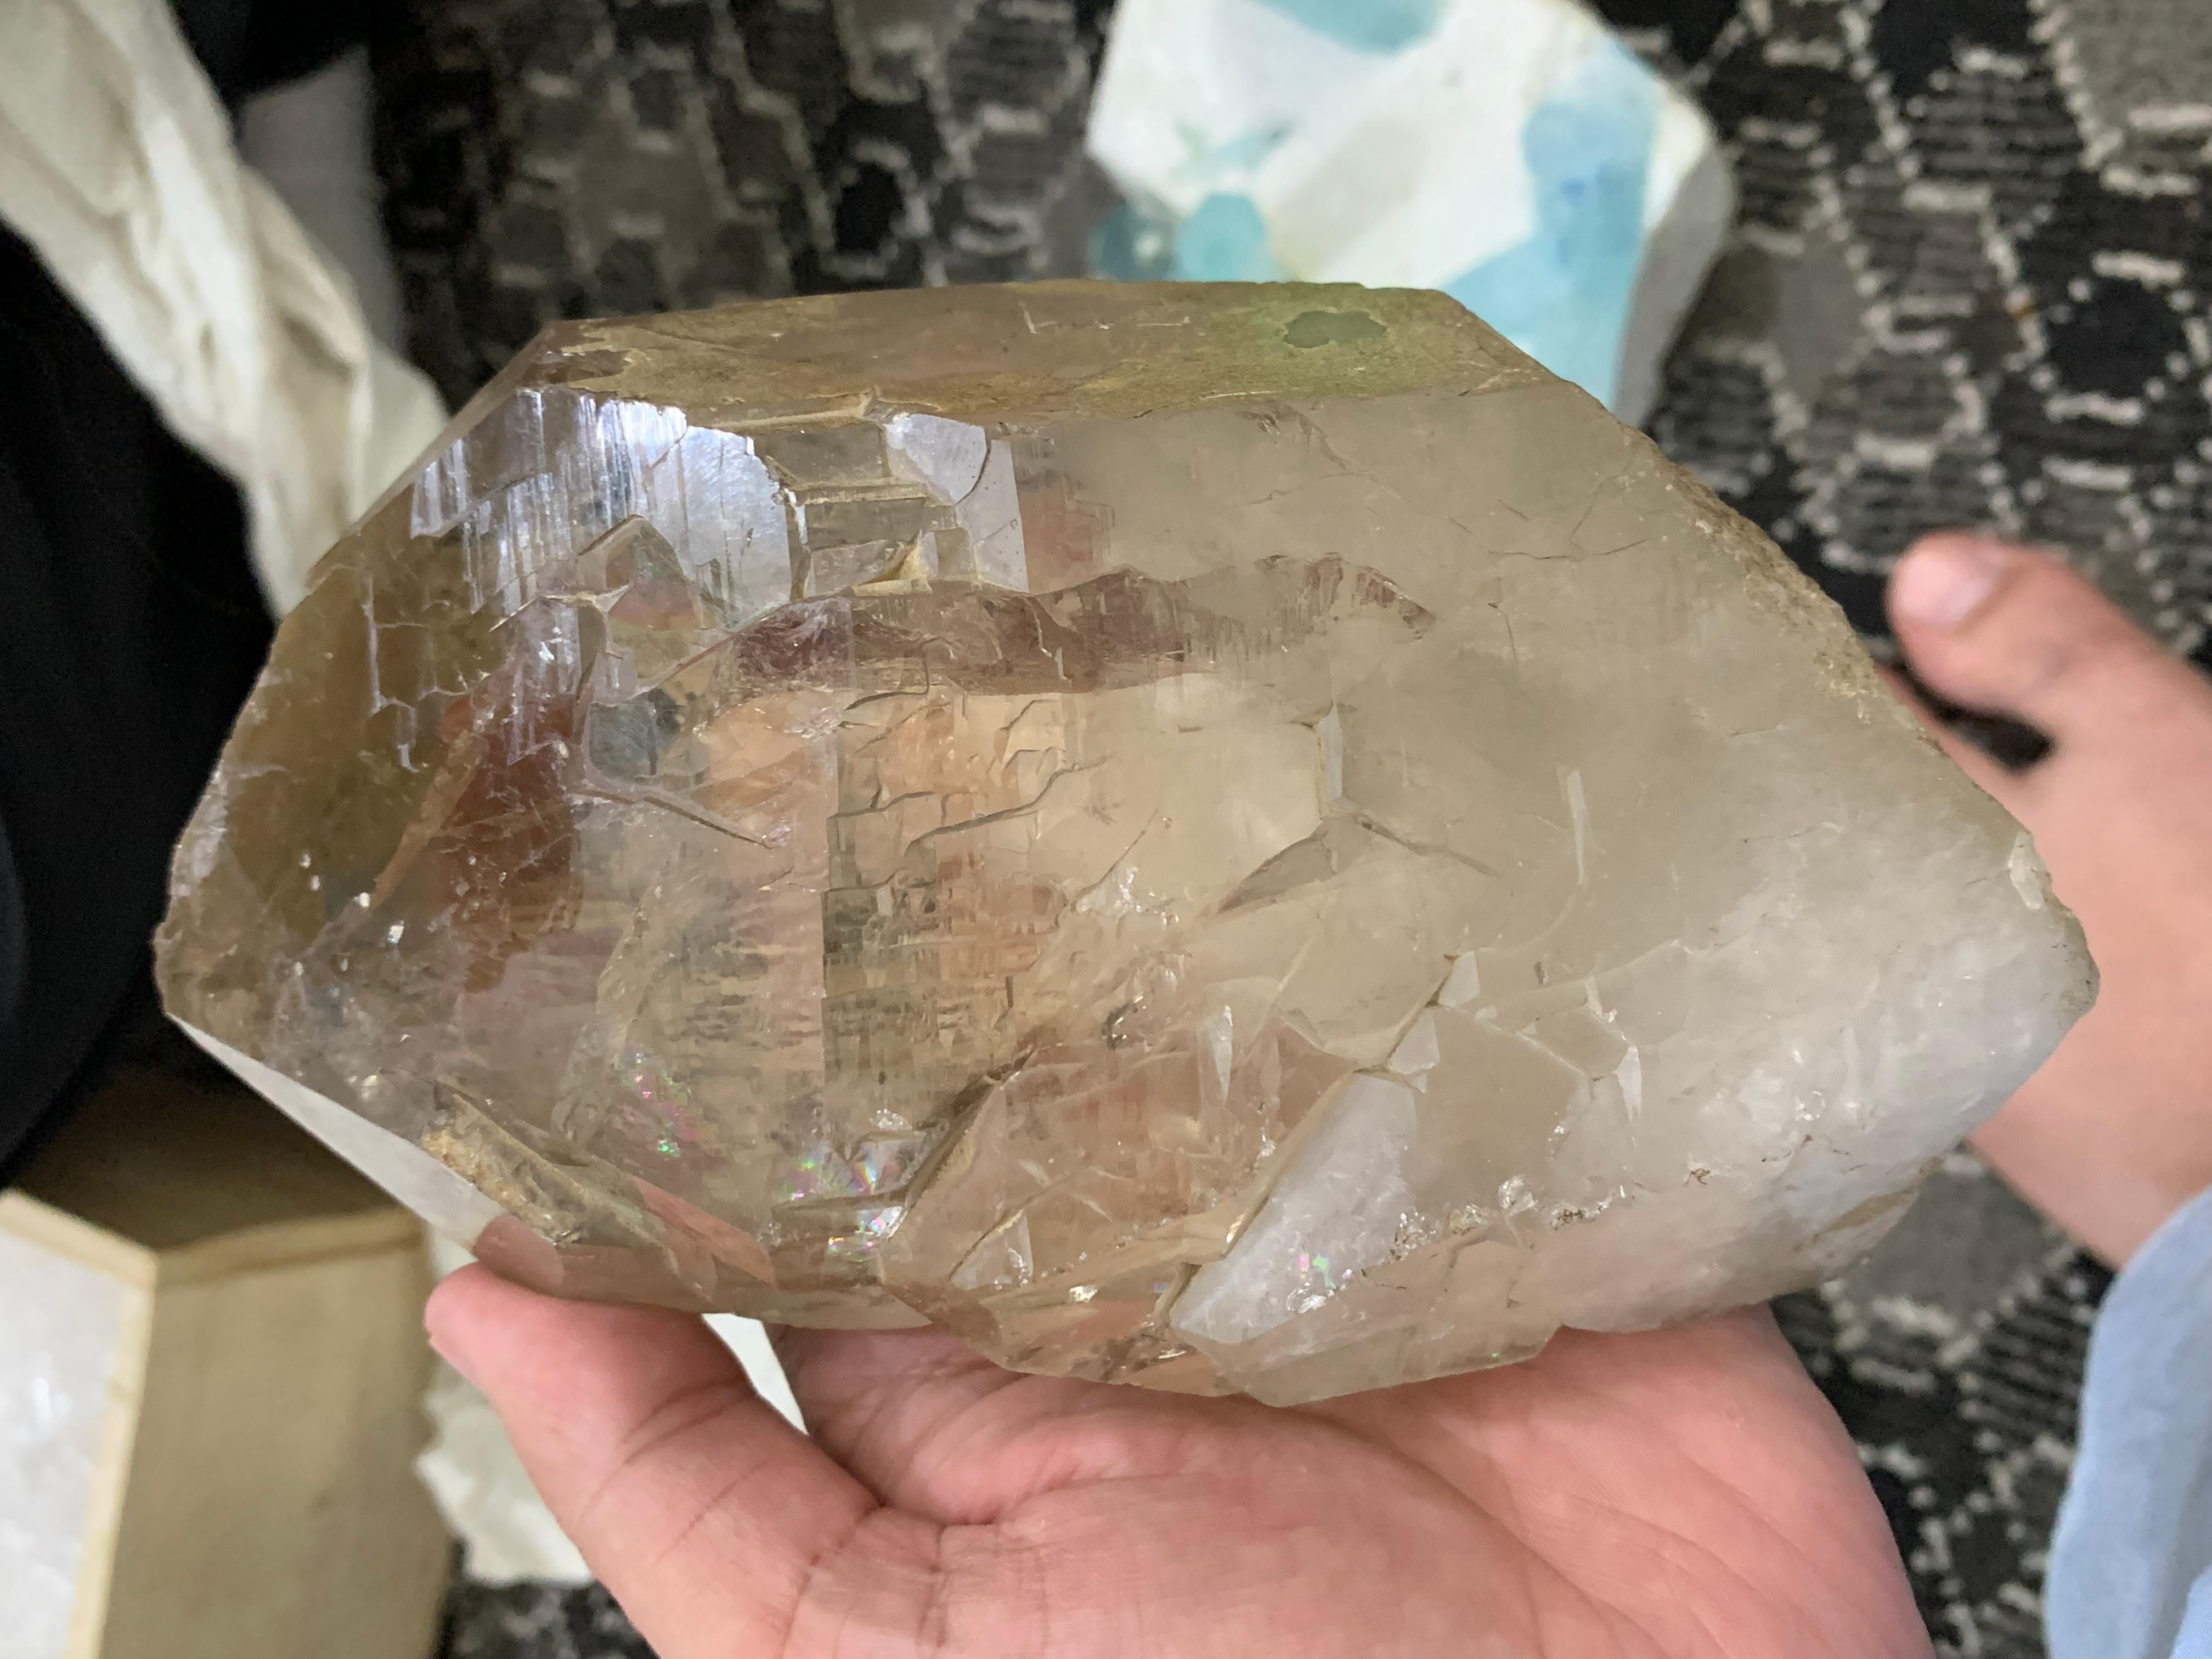 1 Kg plus Gigantic Smoky Quartz From Kunar, Afghanistan 

Weight: 1 kg plus
Dimension: 16.4 x 9.3 x 6.3 Cm
Origin: Kunar, Afghanistan 

Smoky quartz is known for dispersing fear or negativity and removing depression. It can be used to provide